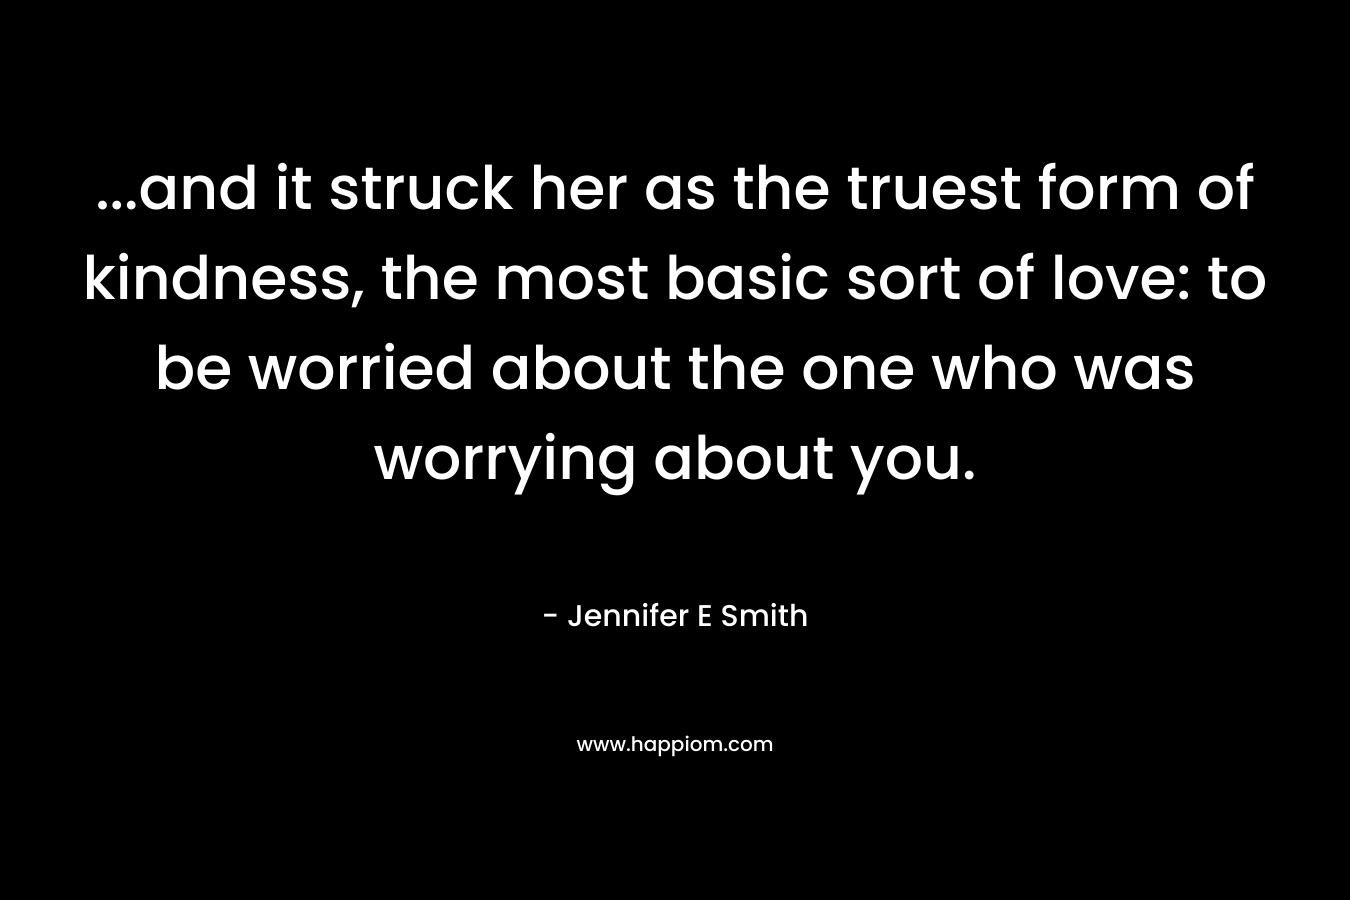 …and it struck her as the truest form of kindness, the most basic sort of love: to be worried about the one who was worrying about you. – Jennifer E Smith